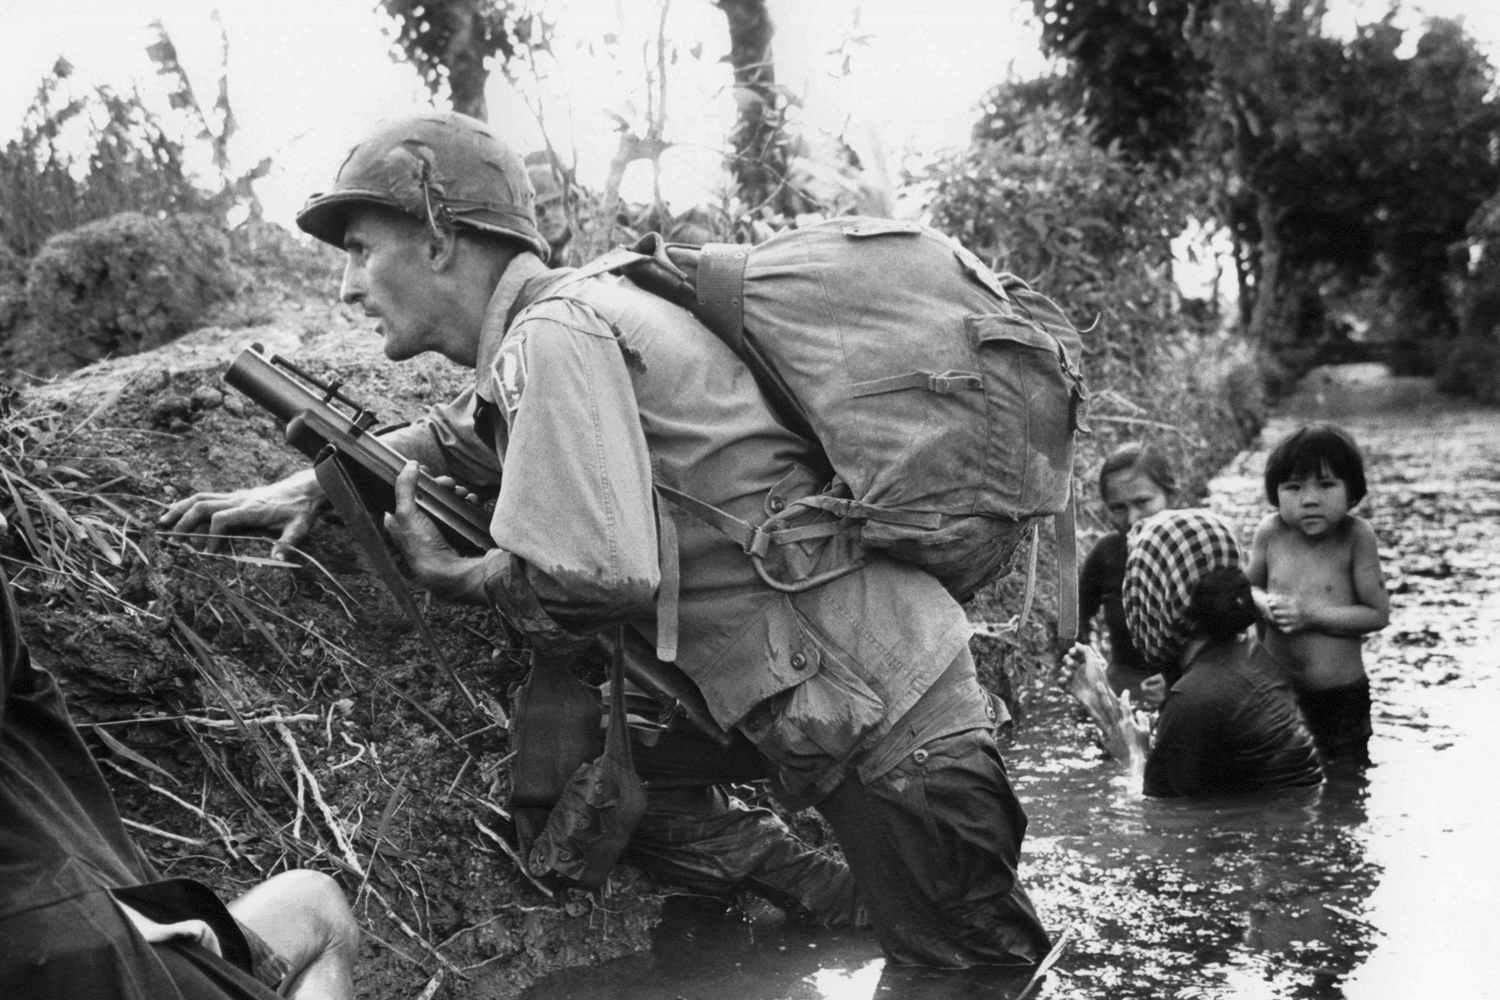 Long Khanh Province, Republic of Vietnam: SP4 R. Richter, 4th Battalion, 503rd Infantry, 173rd Airborne Brigade, lifts his battle weary eyes to the heavens, as if to ask why? Sergeant Daniel E. Spencer stares down at their fallen comrade. The day's battle ended, the silently await the helicopter which will evacuate their comrade from the jungle covered hills. (Courtesy of National Archives and Records Administration)